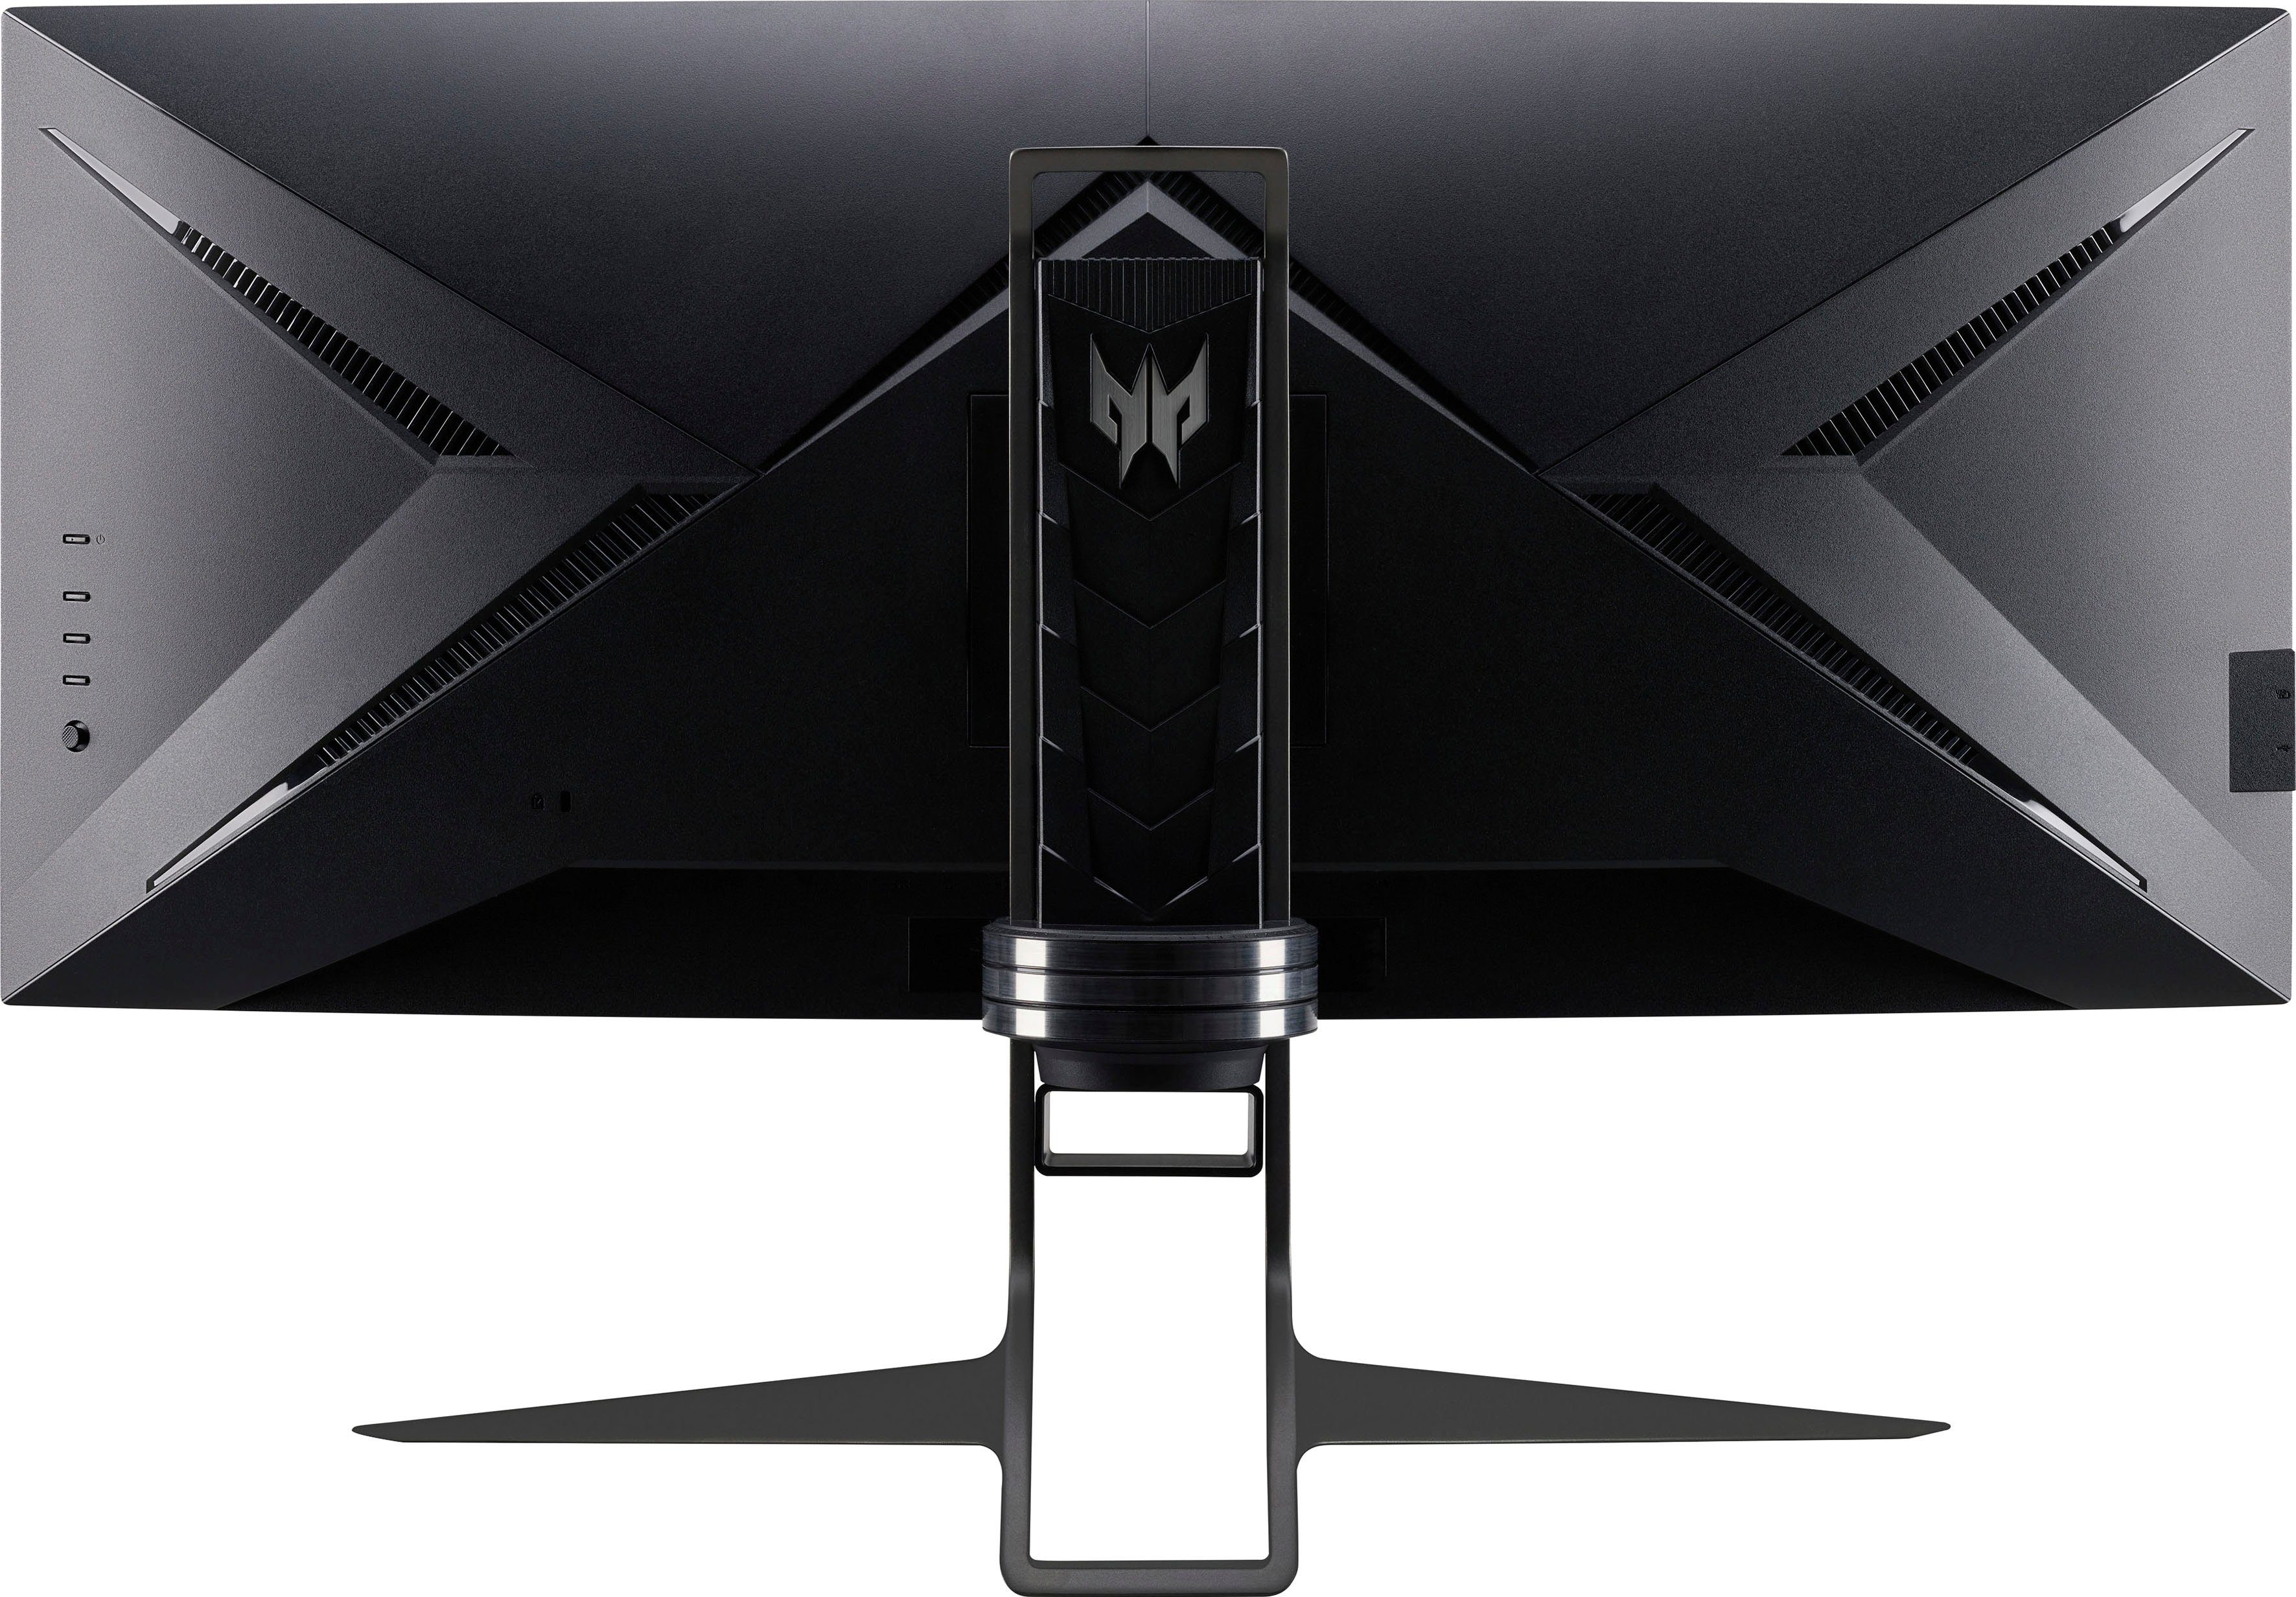 Acer Predator X34GS Curved-Gaming-LED-Monitor ms (86,4 x 3440 IPS-LED) cm/34 0,5 Reaktionszeit, 1440 180 Hz, ", px